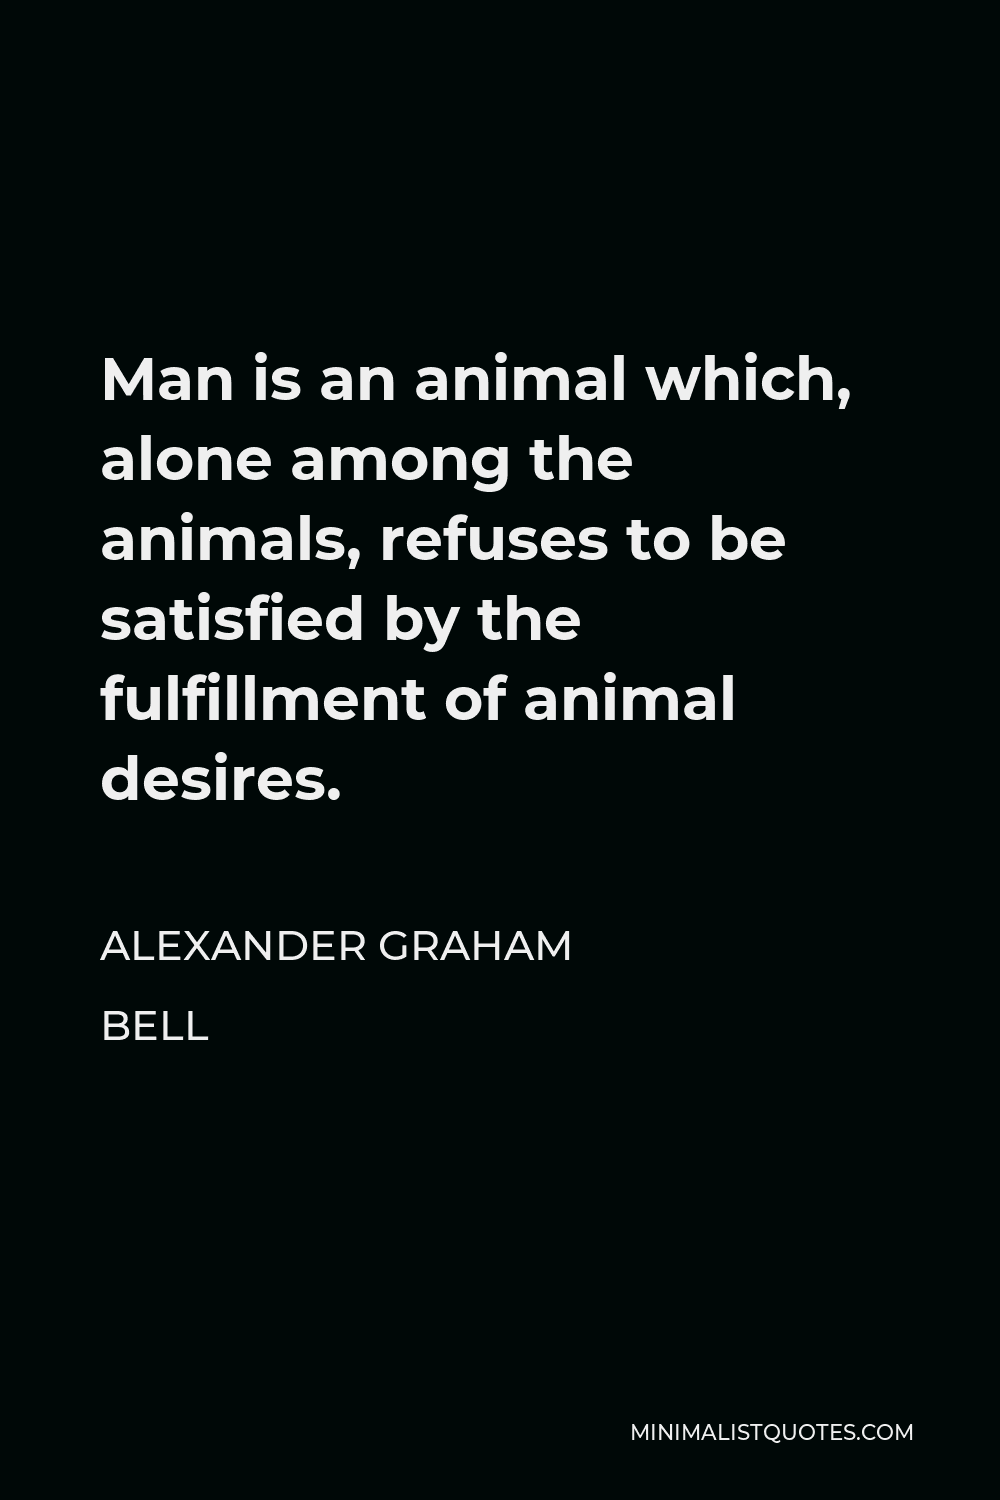 Alexander Graham Bell Quote - Man is an animal which, alone among the animals, refuses to be satisfied by the fulfillment of animal desires.